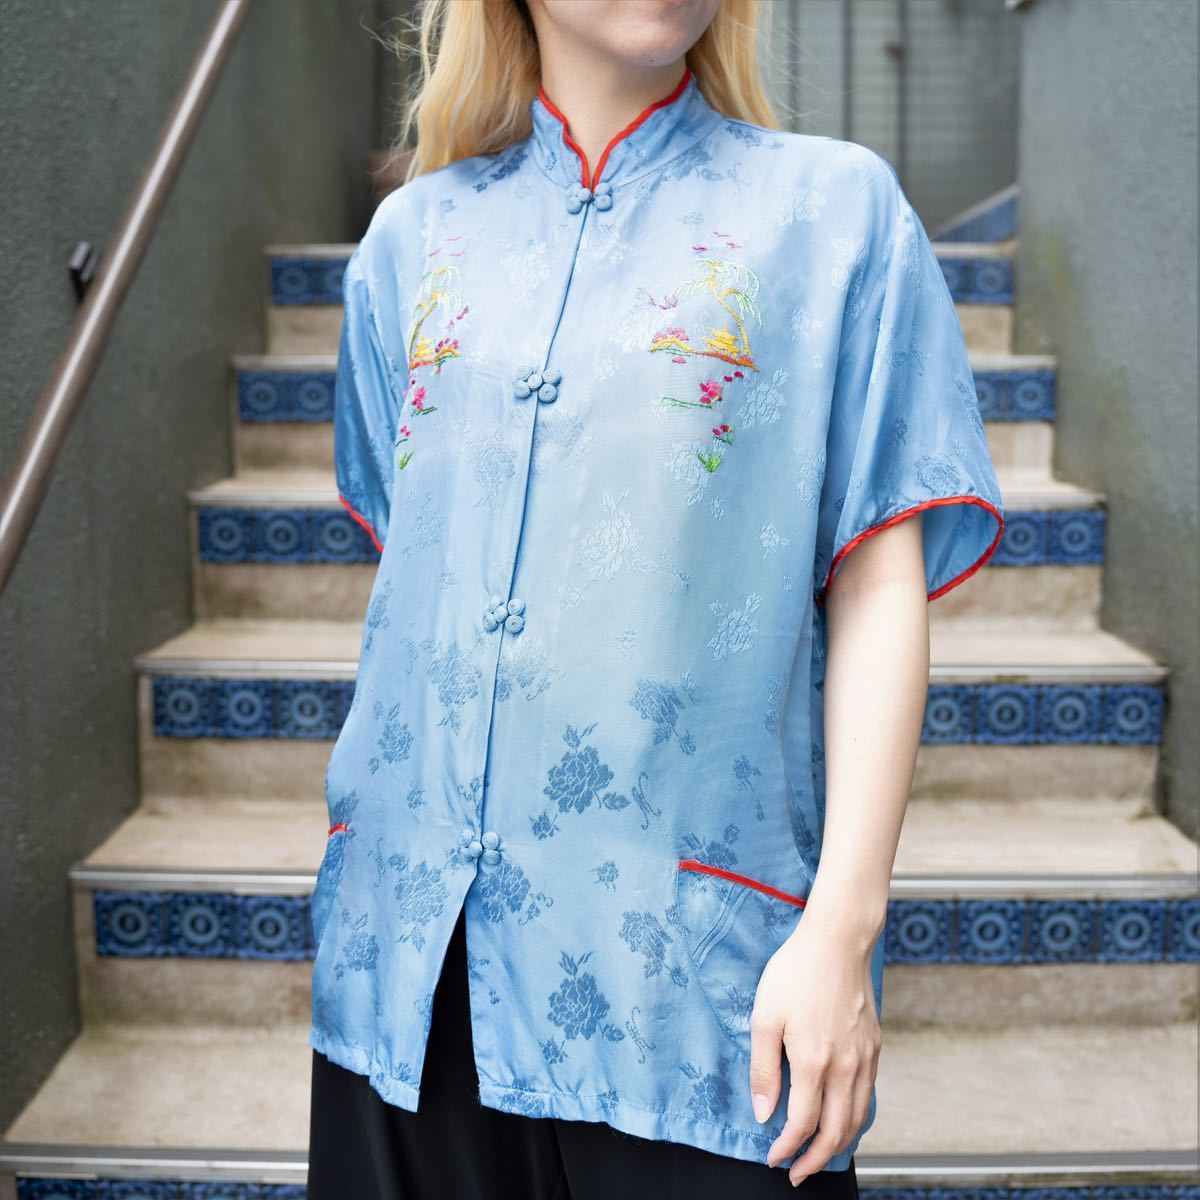 *SPECIAL ITEM* USA VINTAGE GOLDEN BEE EMBROIDERY JACQUARD DESIGN DESIGN CHINA SHIRT/アメリカ古着金蜂ジャガード刺繍チャイナシャツ